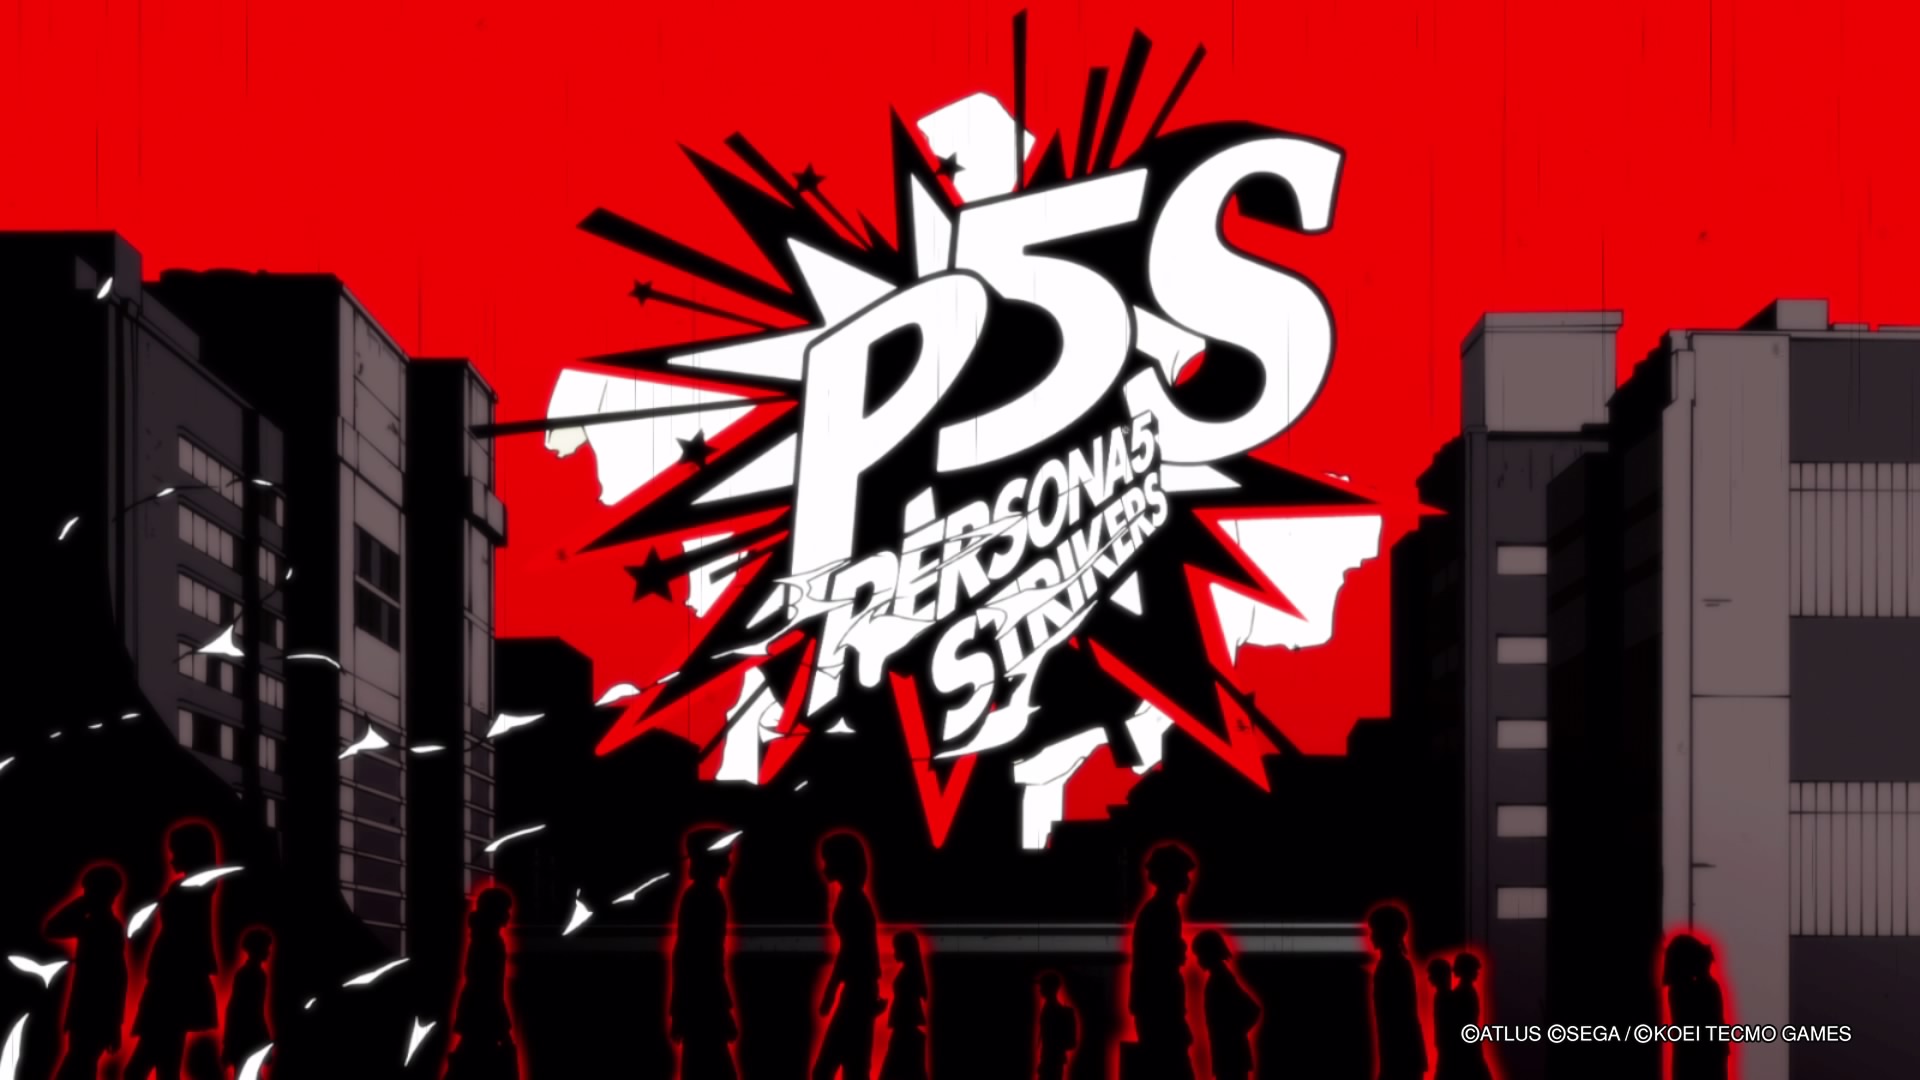 Persona 5 Strikers Review - You'll Never See It Coming